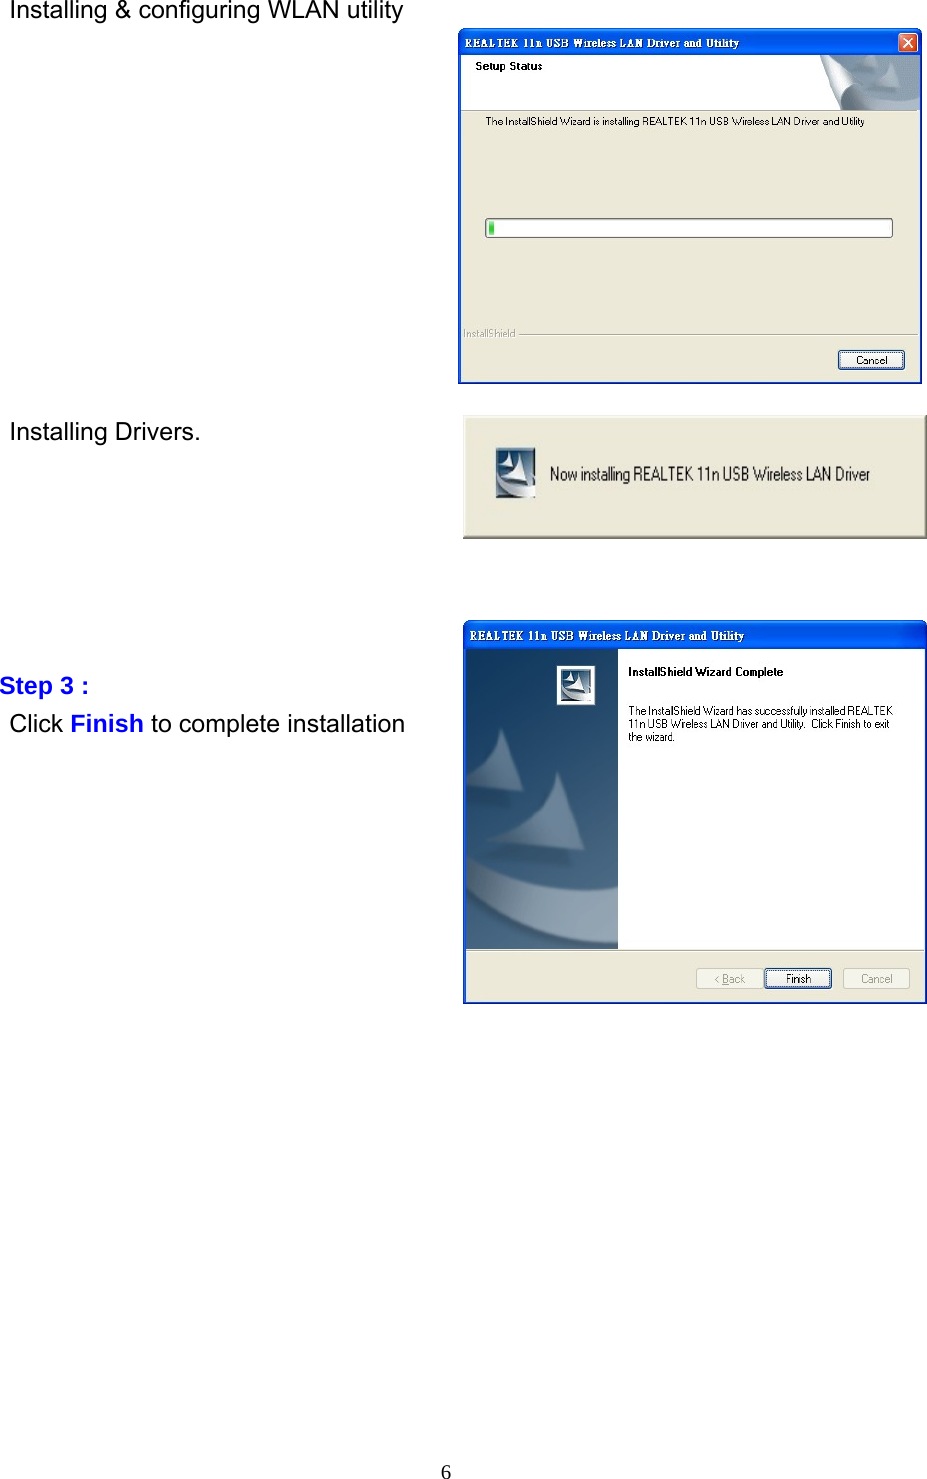 6   Installing &amp; configuring WLAN utility                 Installing Drivers.             Step 3 : Click Finish to complete installation                    